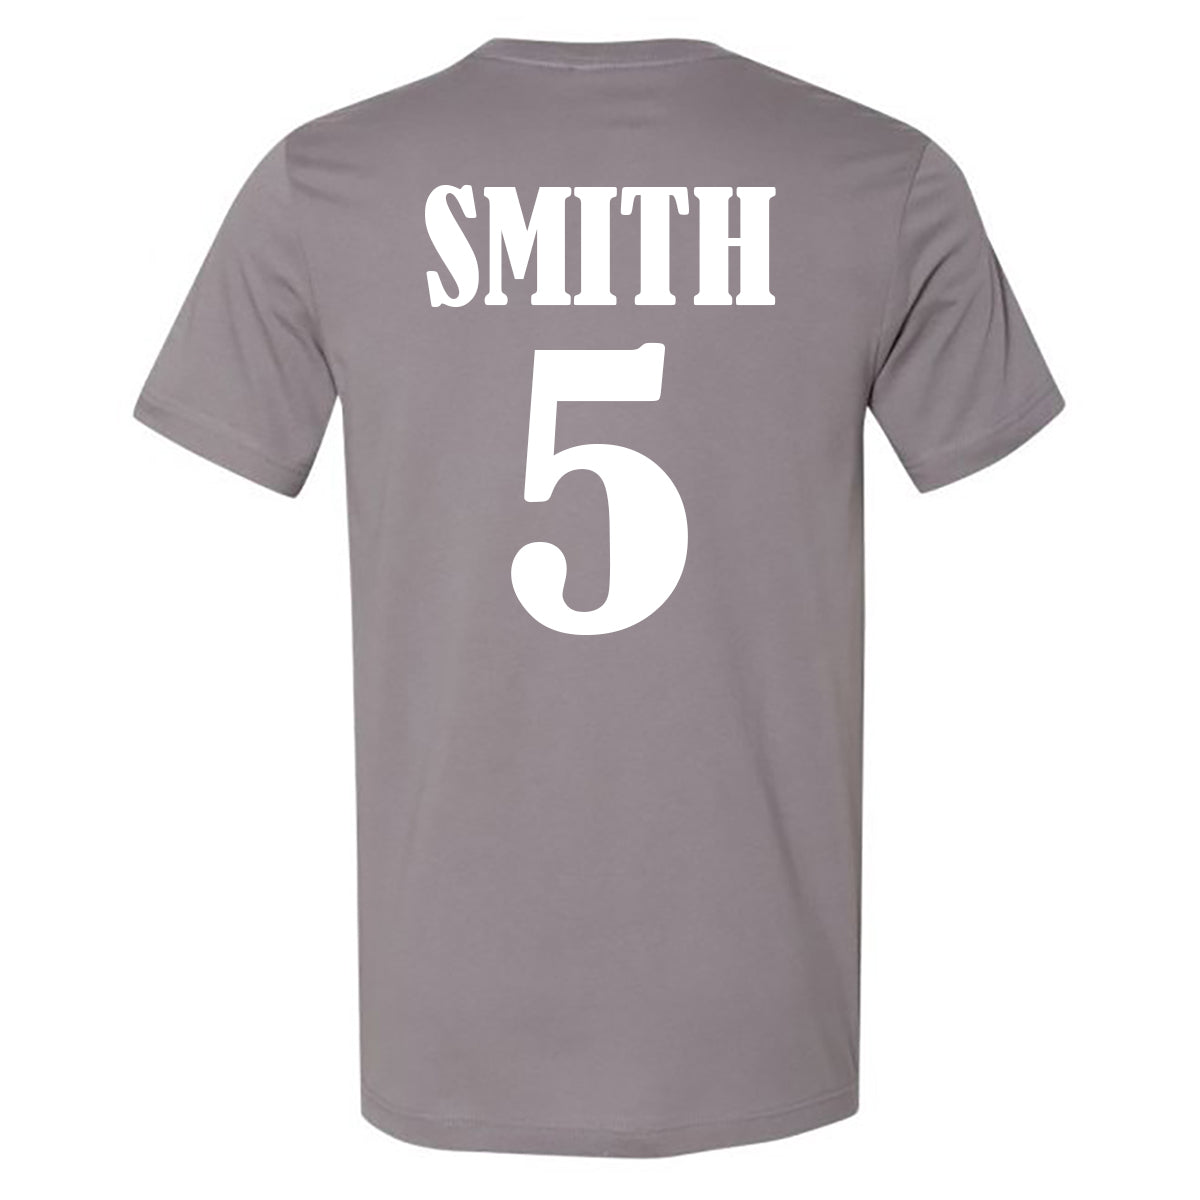 Windsor - Knights Football Player - Charcoal Short/Long Sleeves Tee - Southern Grace Creations